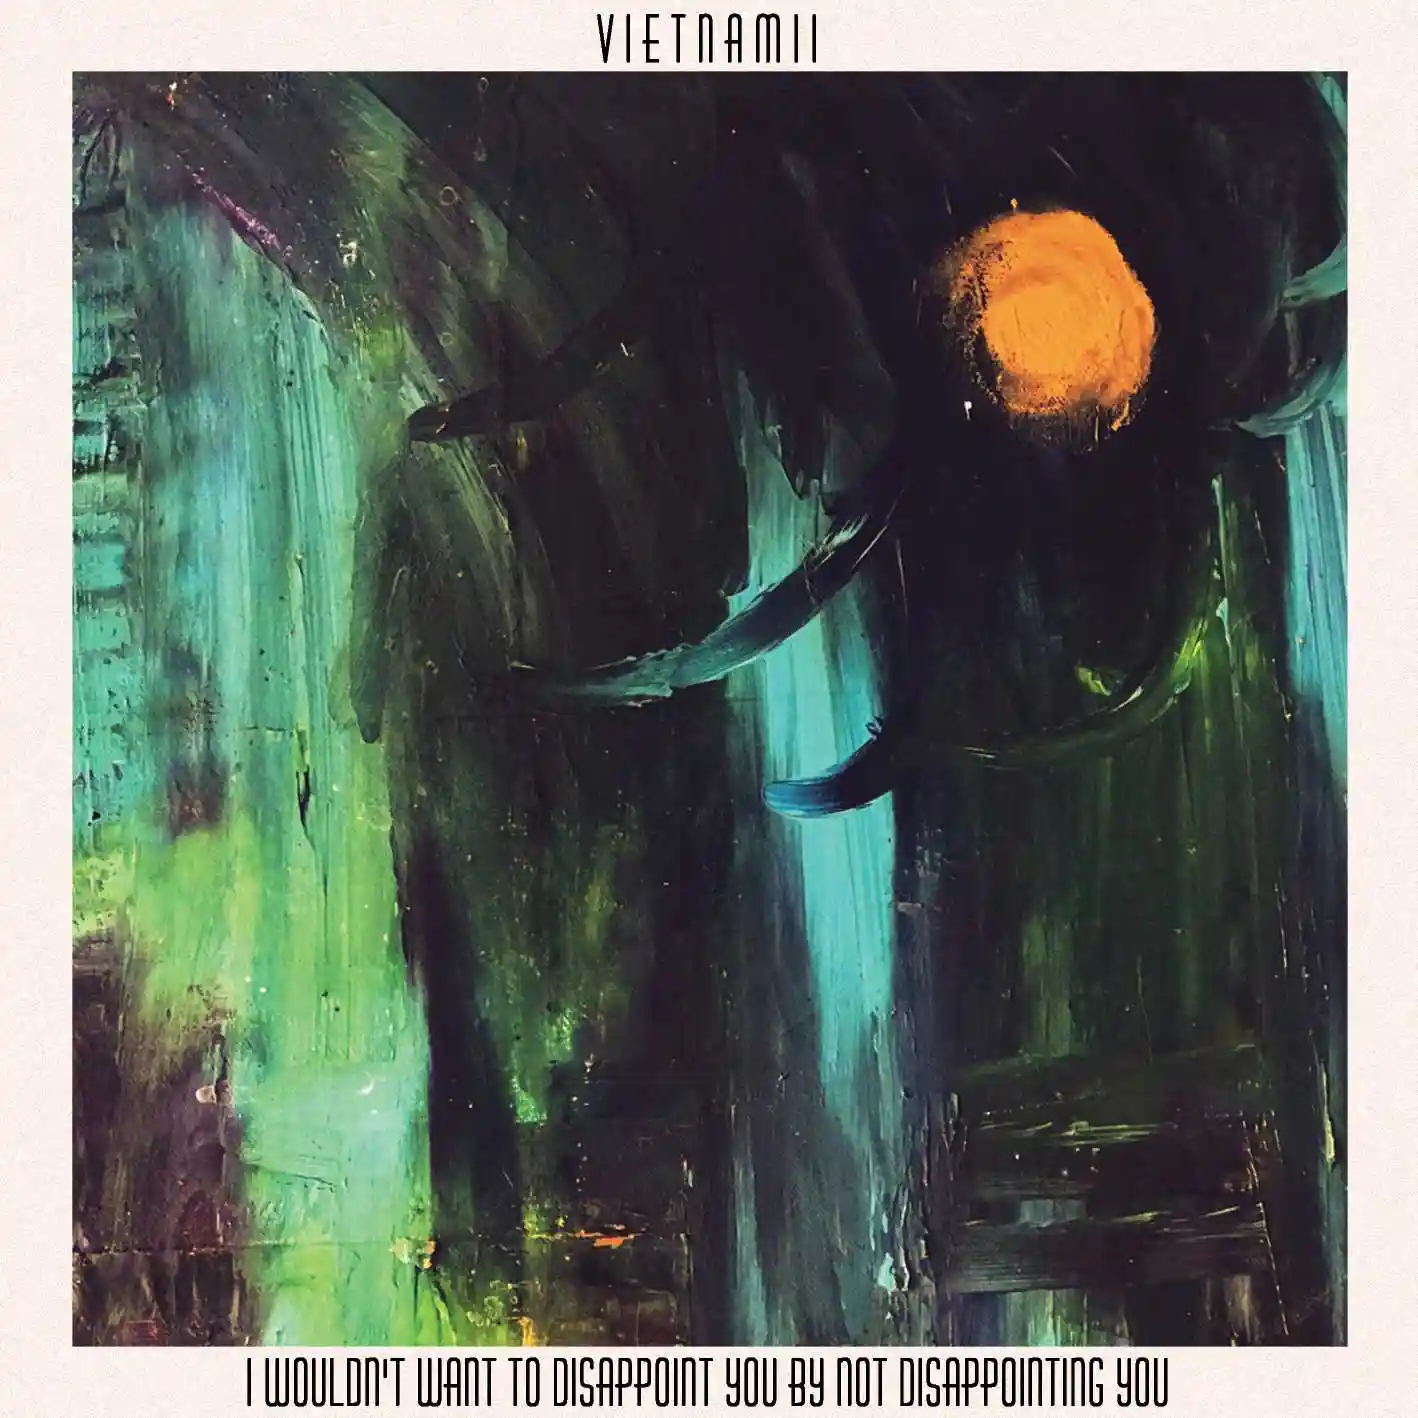 Album cover for “I Wouldn't Want To Disappoint You By Not Disappointing You” by Vietnam II